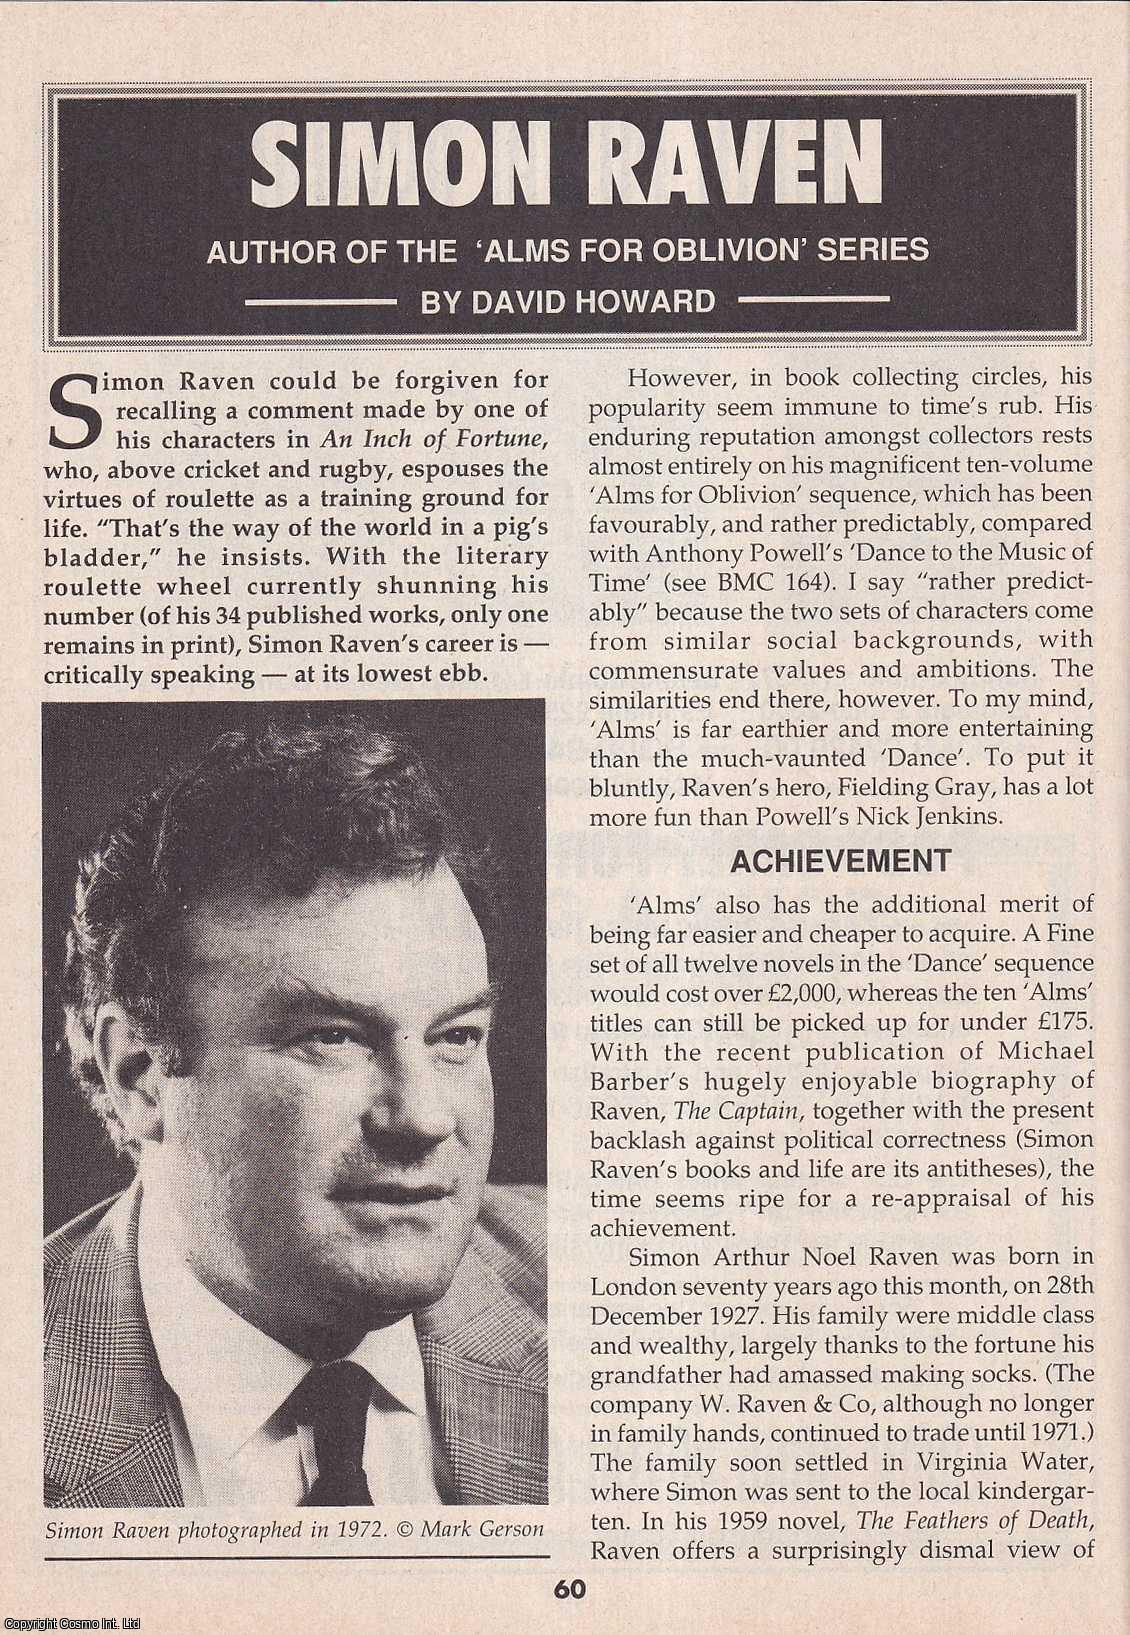 David Howard - Simon Raven. Author of The Arms for Oblivion Series. This is an original article separated from an issue of The Book & Magazine Collector publication, 1997.